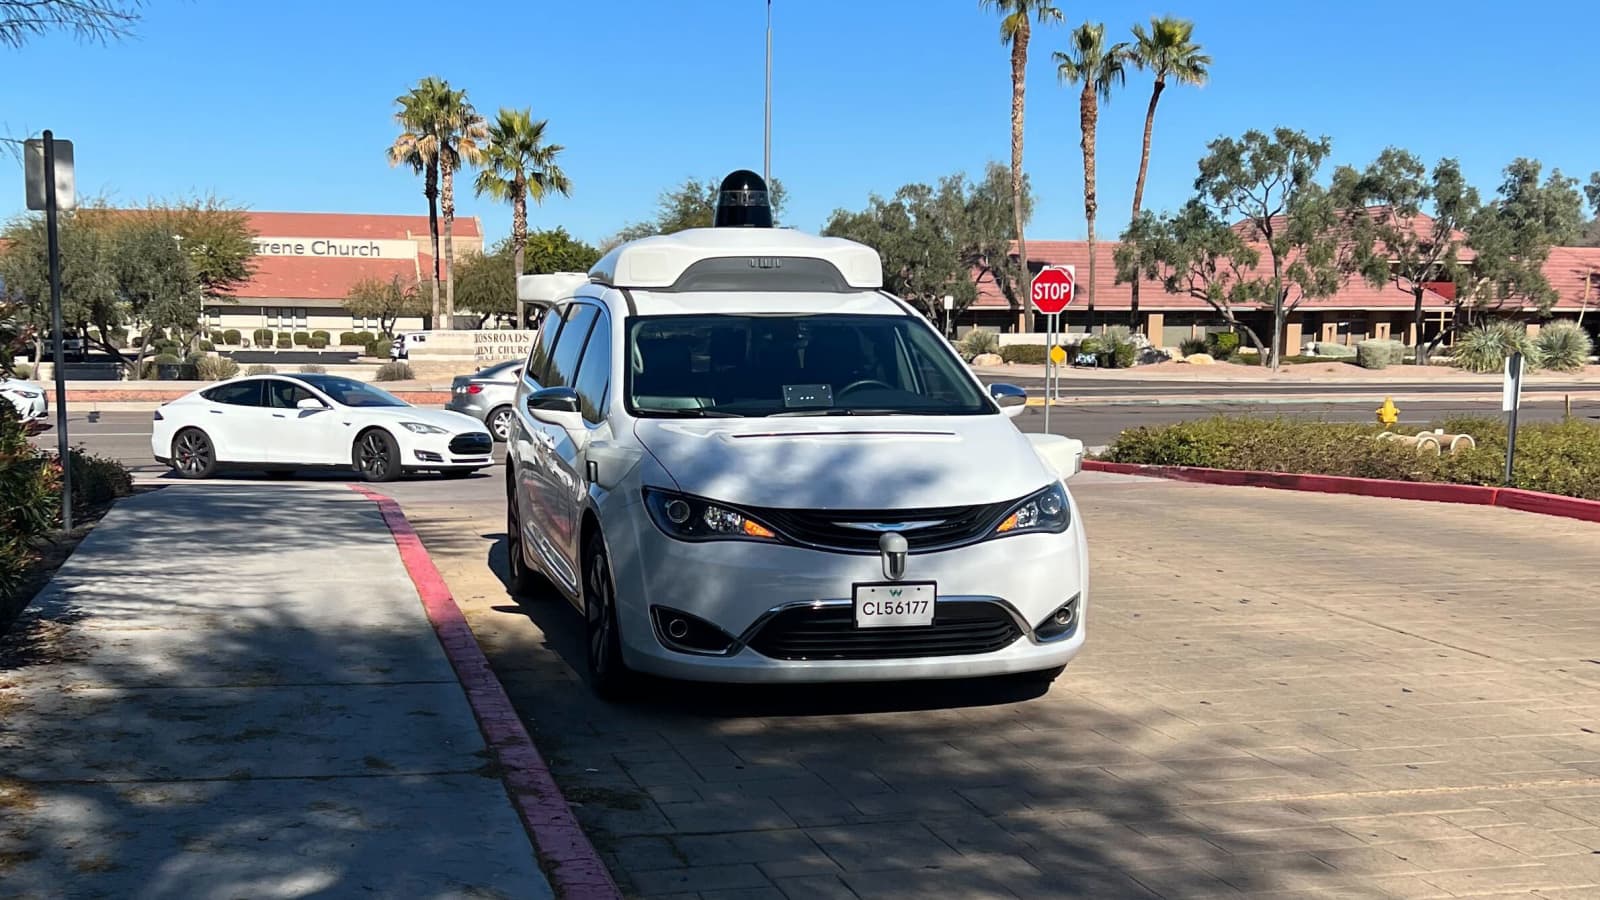 waymo-teams-up-with-uber-to-launch-driverless-vehicles-in-phoenix